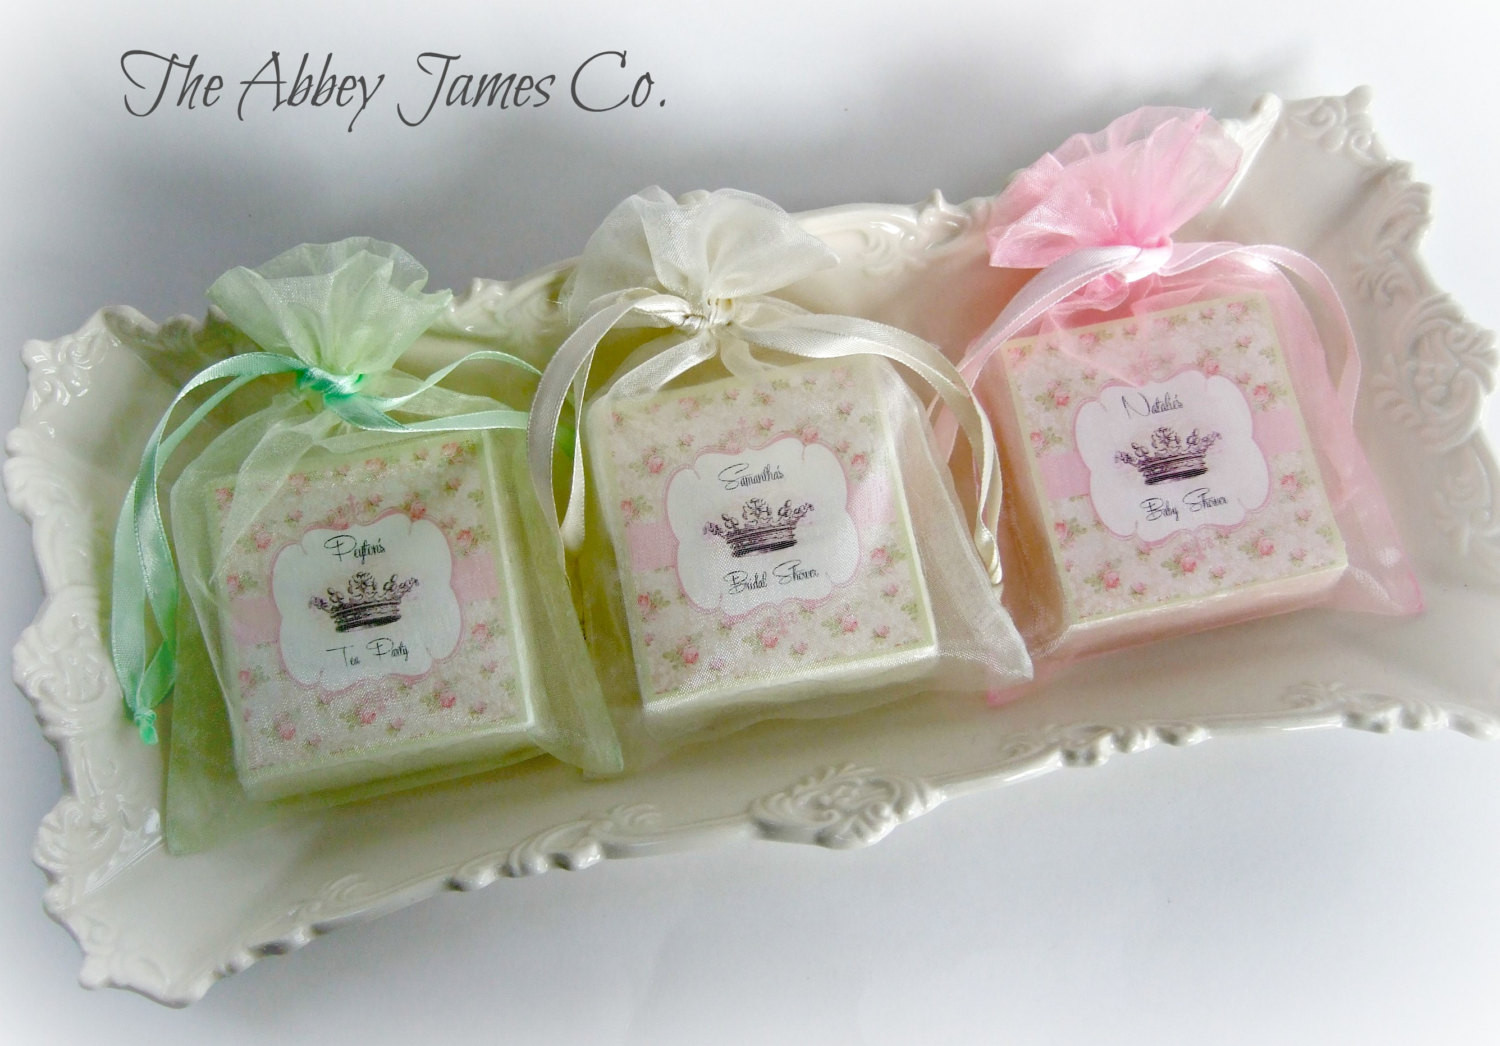 Tea Party Favors Baby Shower
 Shabby Chic Shower Favors Tea Party Favors Baby by AbbeyJames